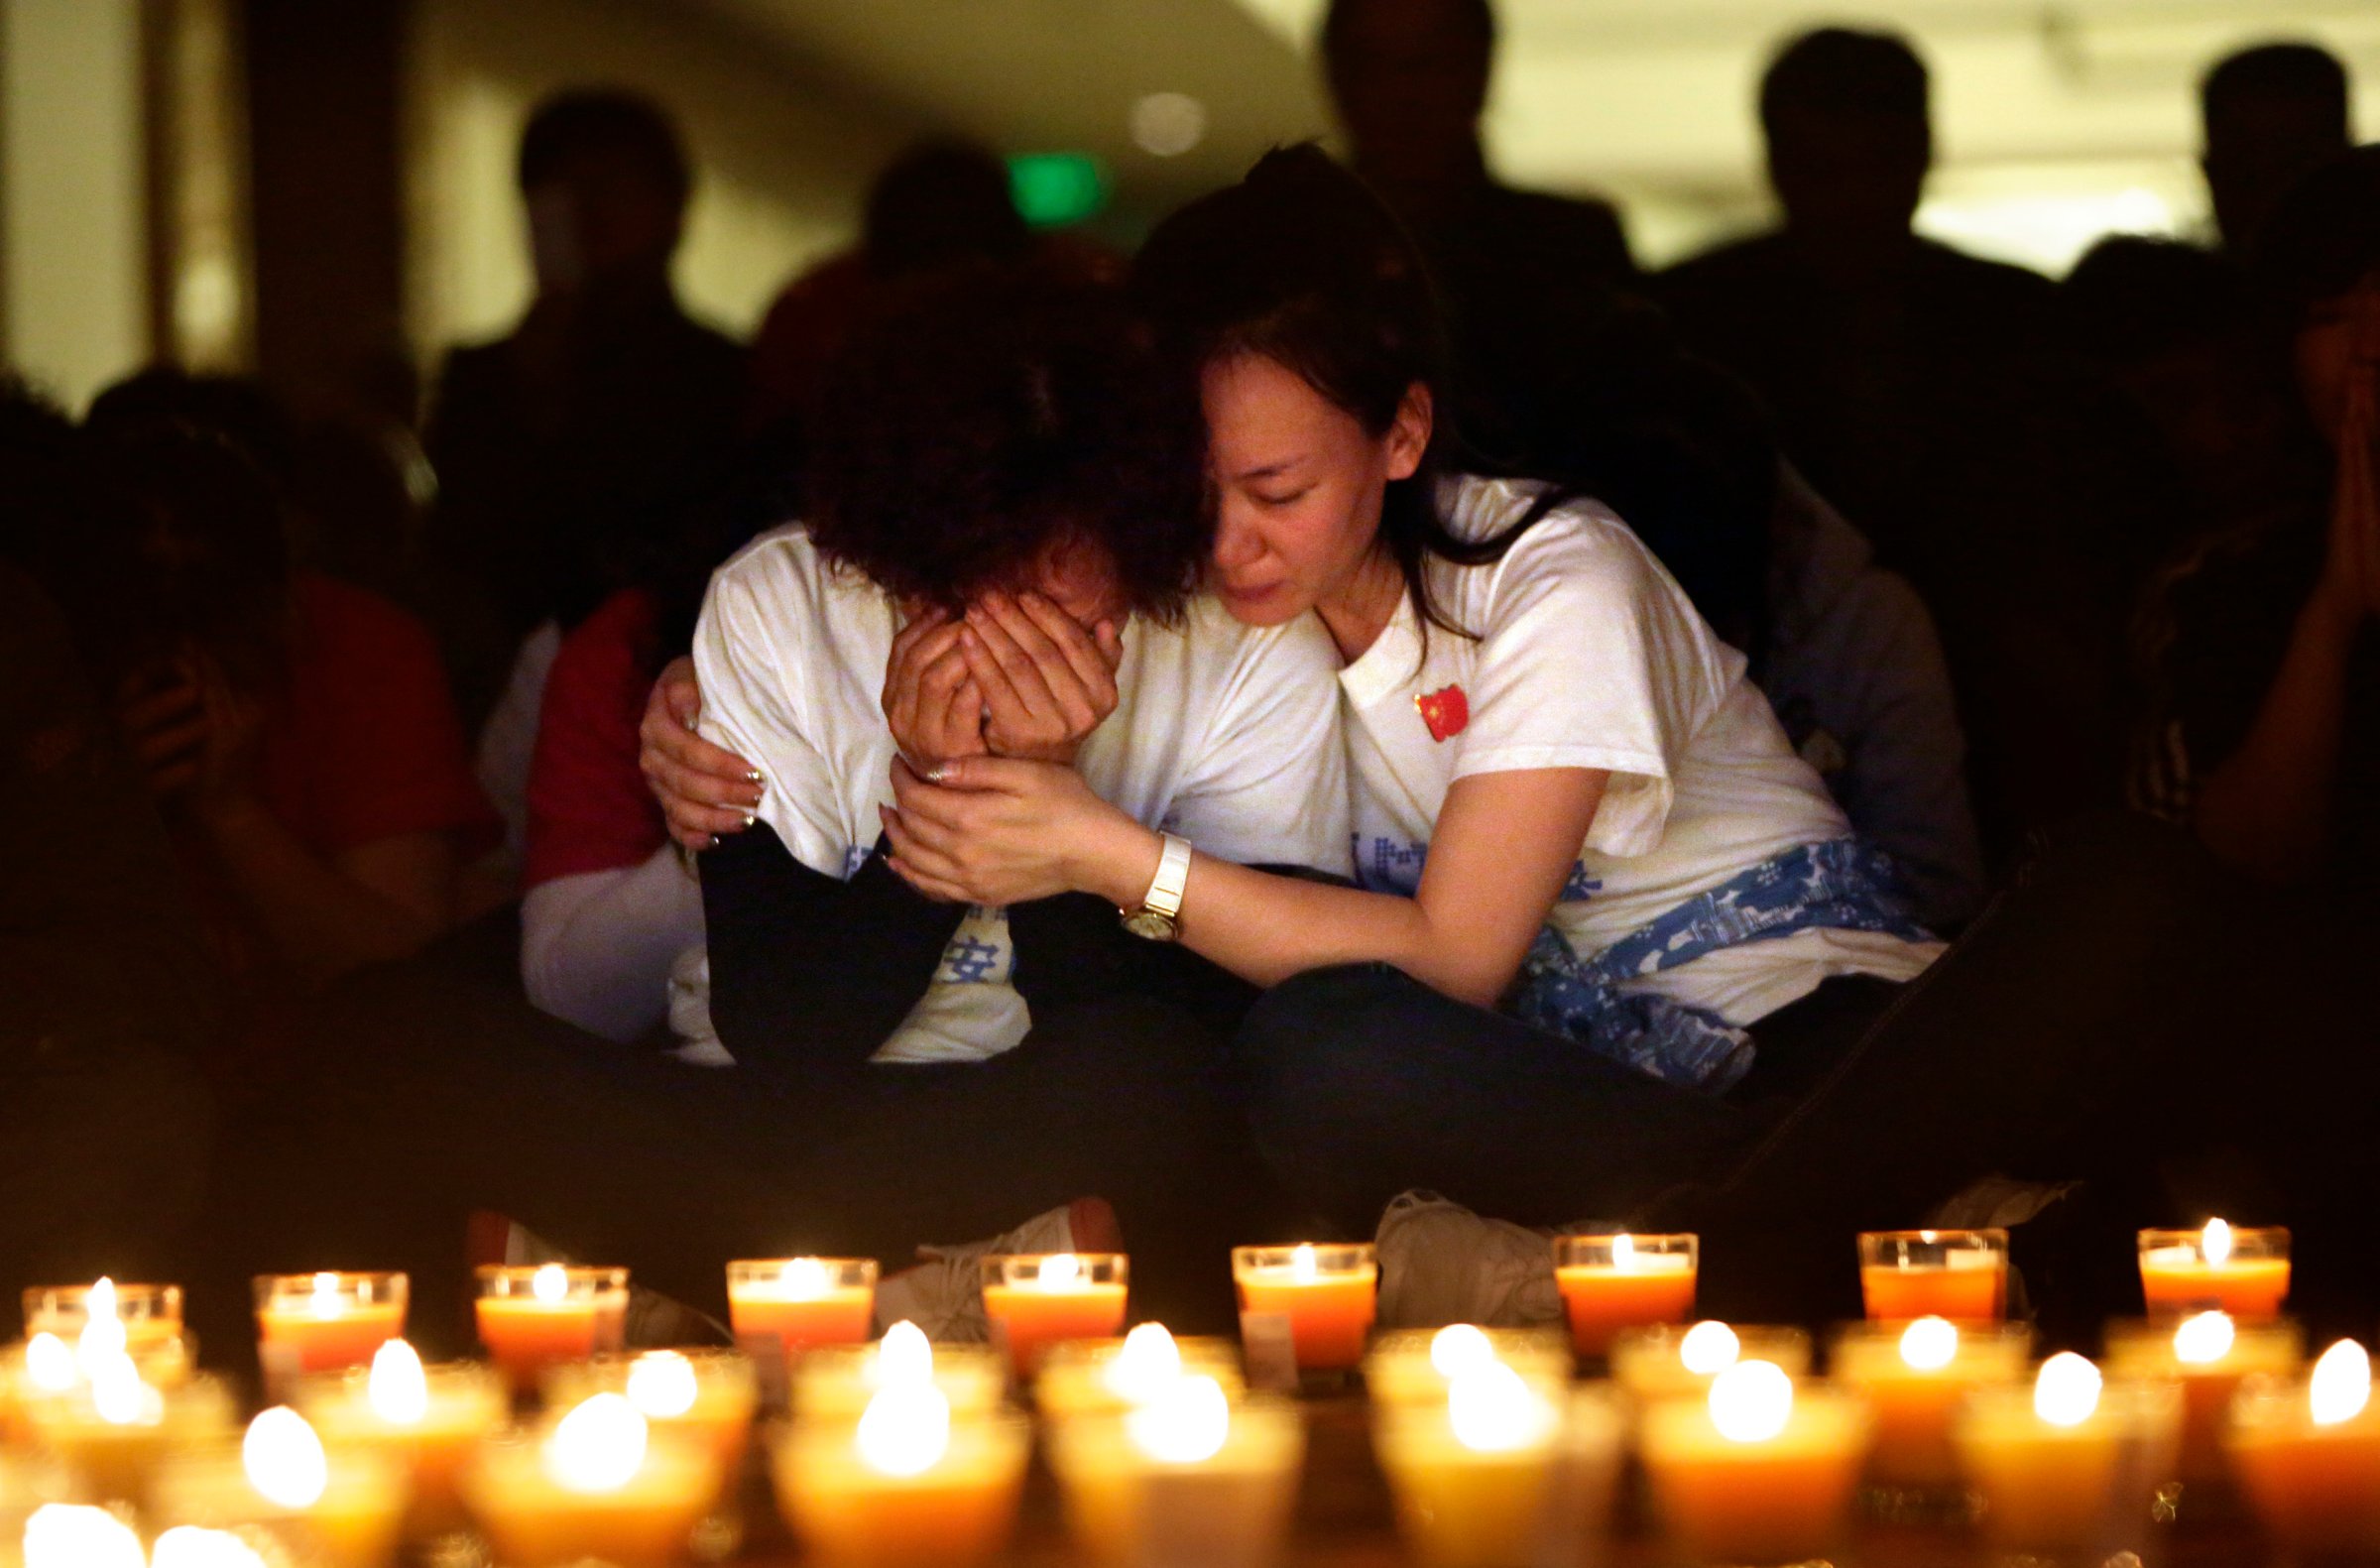 A family member cries as she and other relatives pray during a candlelight vigil for passengers onboard the missing Malaysia Airlines Flight MH370 in Beijing